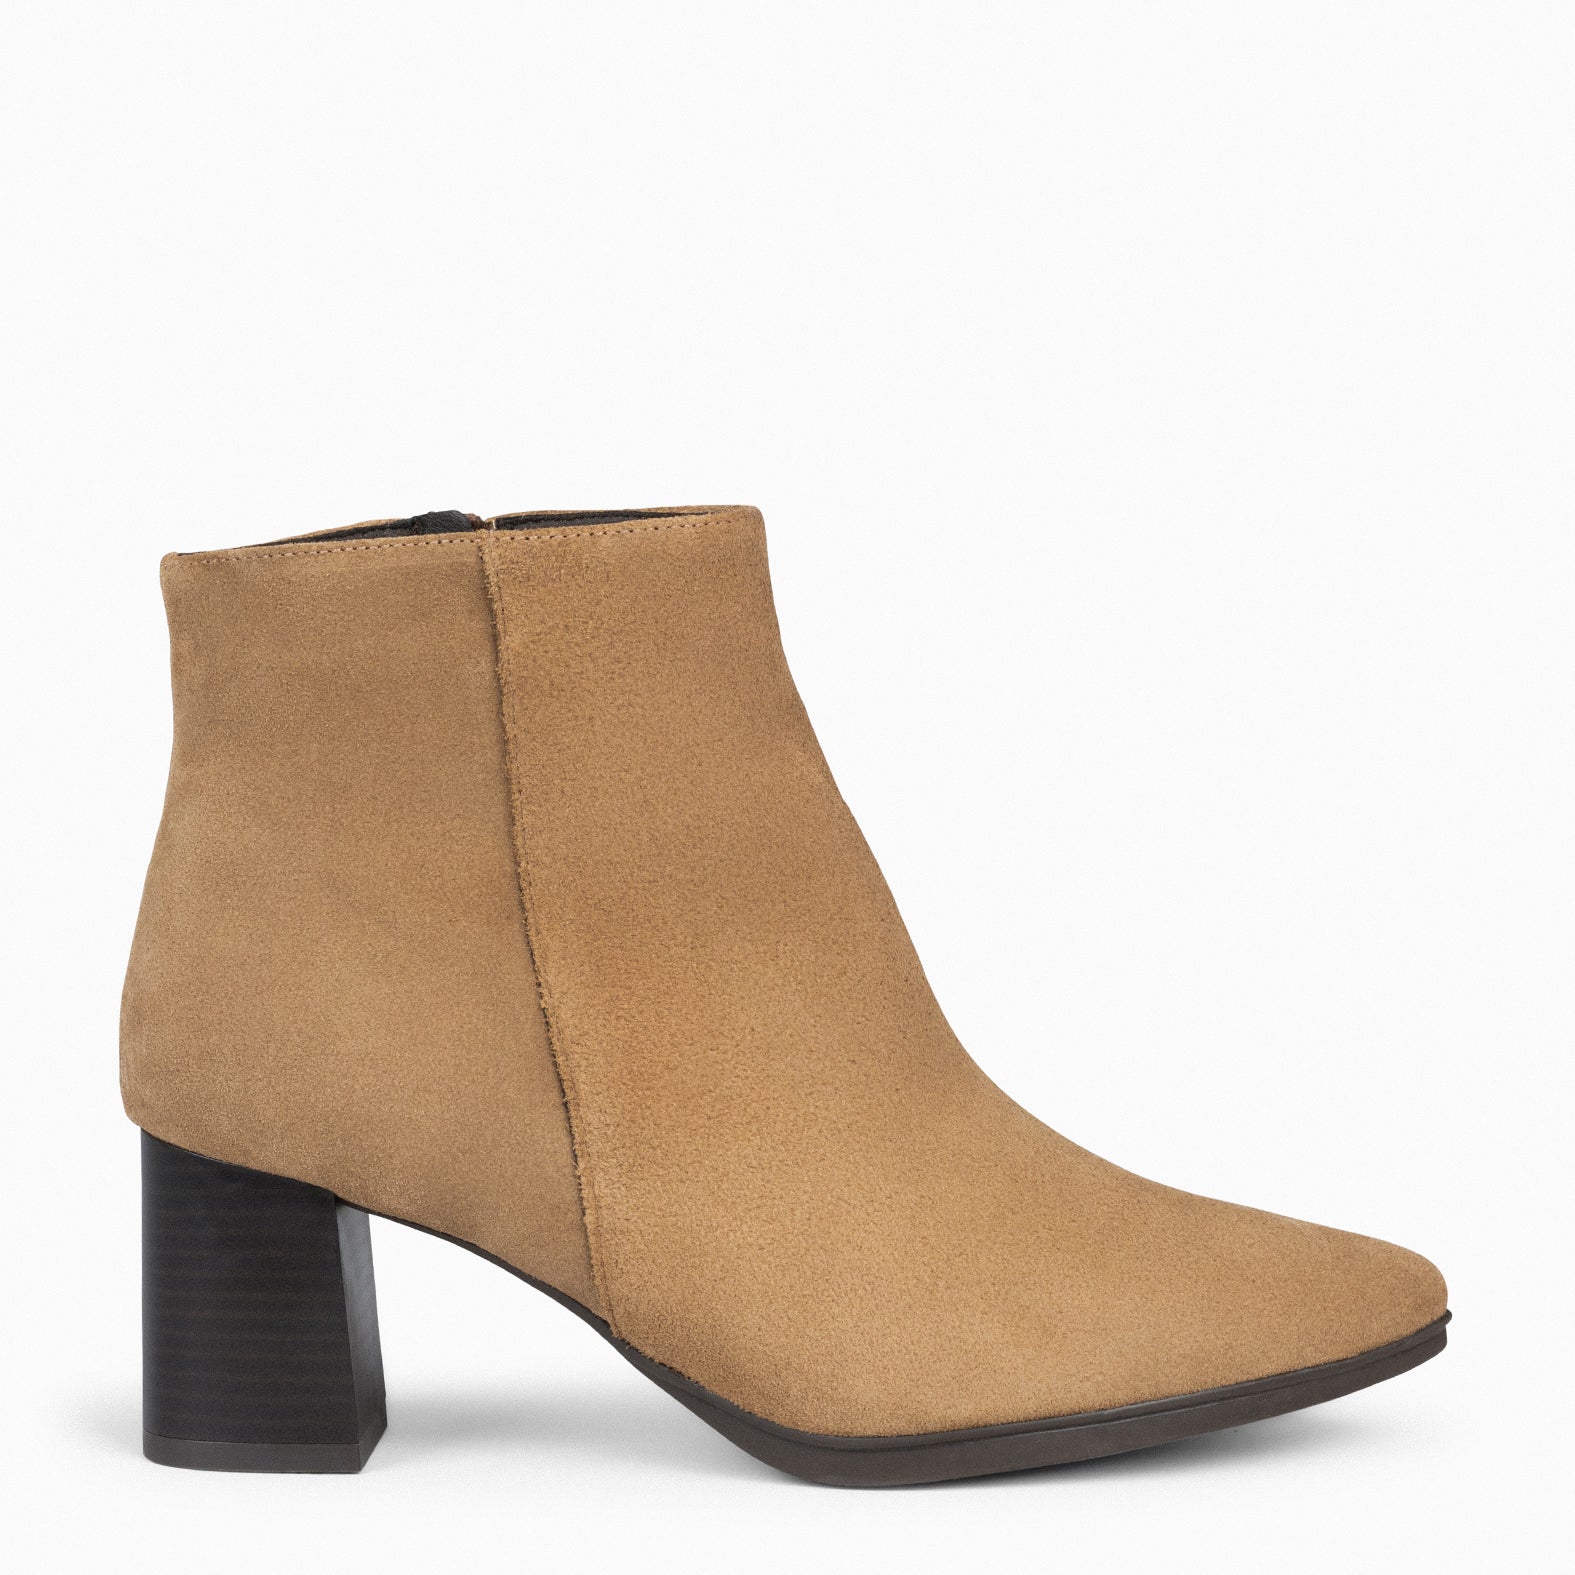 CITY - BROWN suede leather wide heel ankle boots 